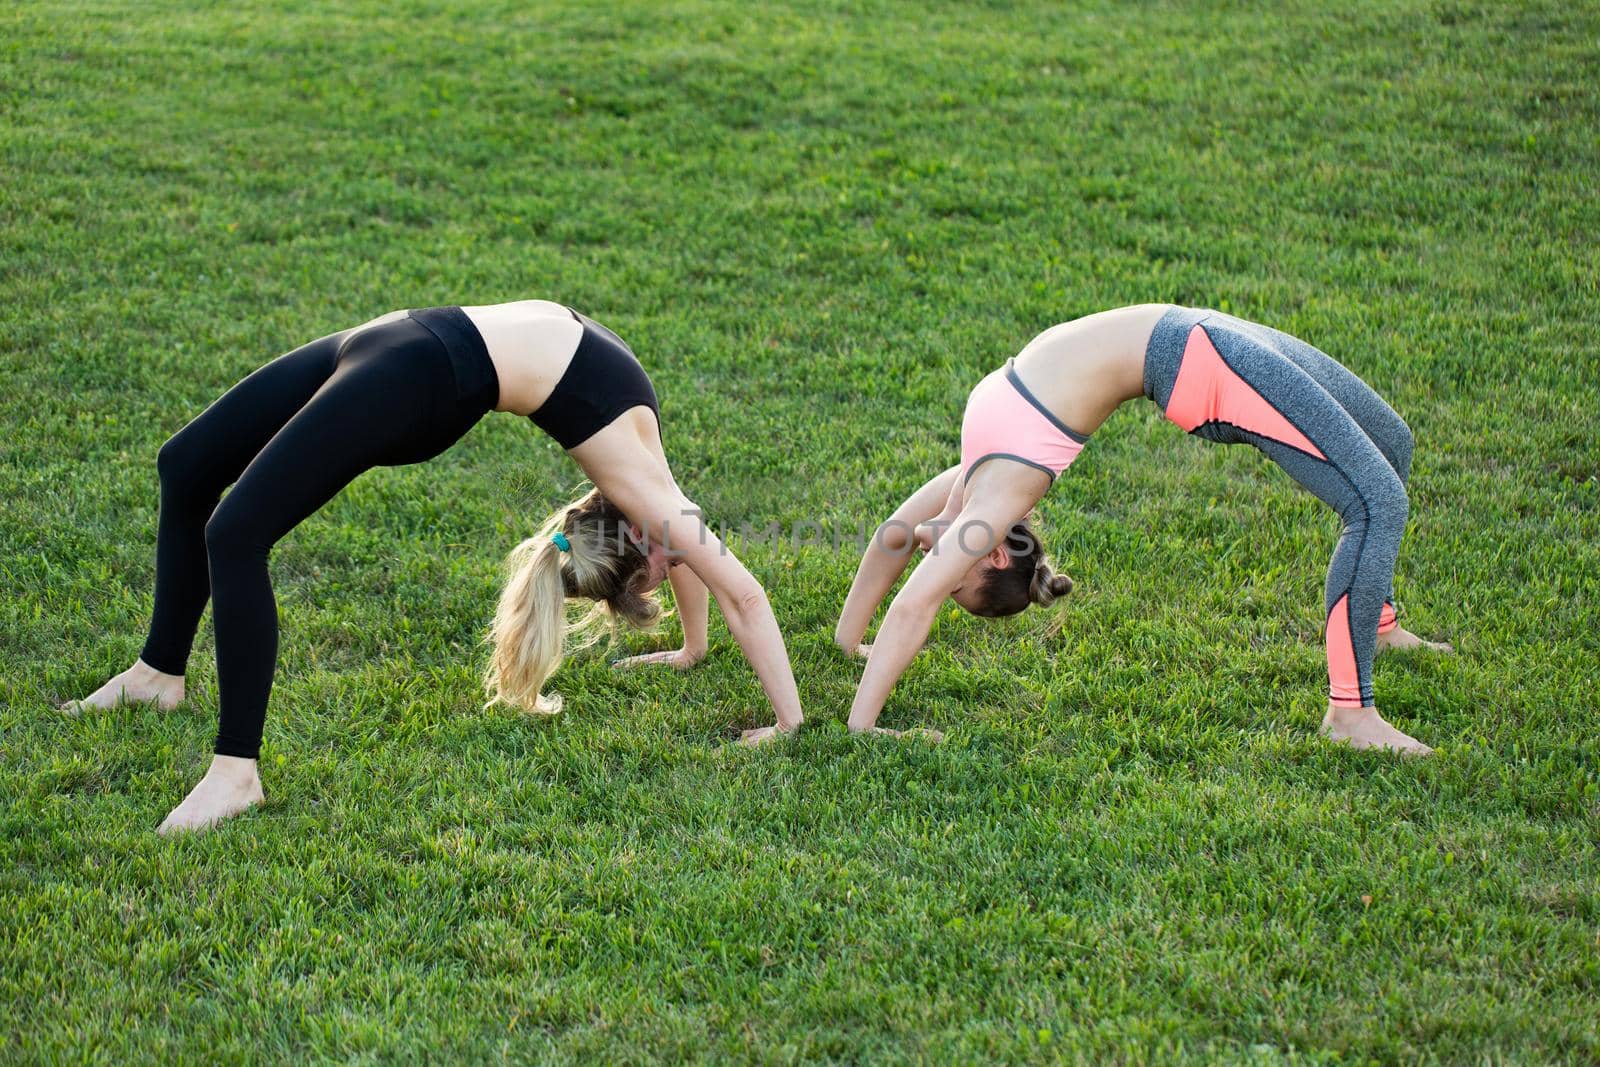 Girlfriends practice yoga in the park on the grass. by StudioPeace